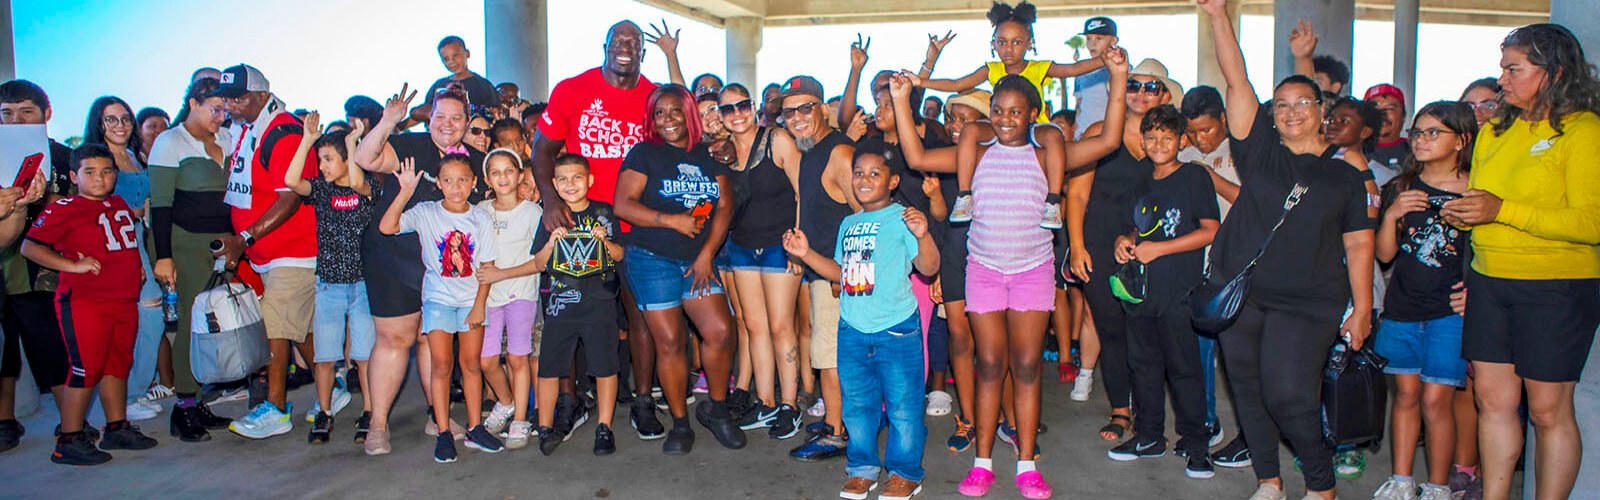 Families at the Bullard Family Foundation Back to School Bash received  30,000 filled backpacks, medical services, dental exams and cleanings, haircuts, food, entertainment and connections to important nonprofit services.